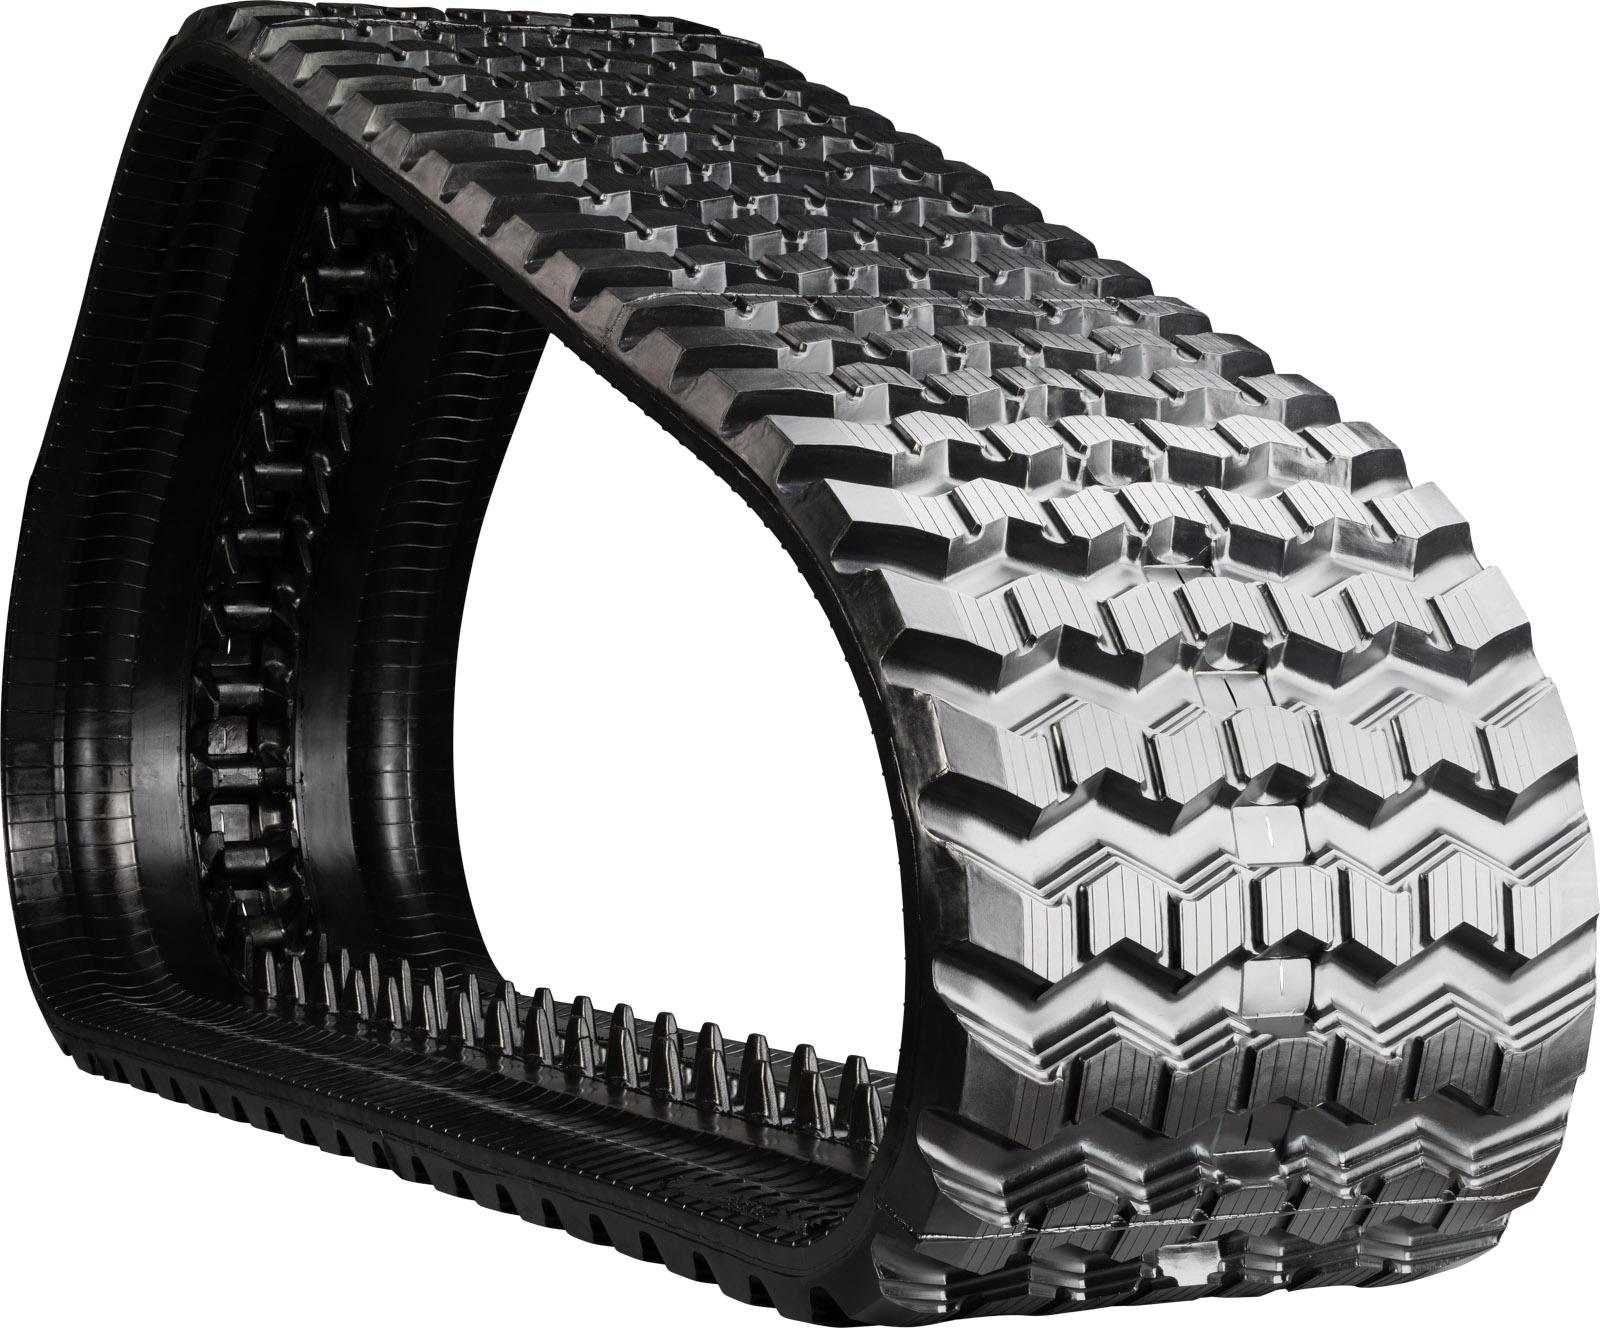 set of 2 16" camso heavy duty sawtooth pattern rubber track (400x86bx55)